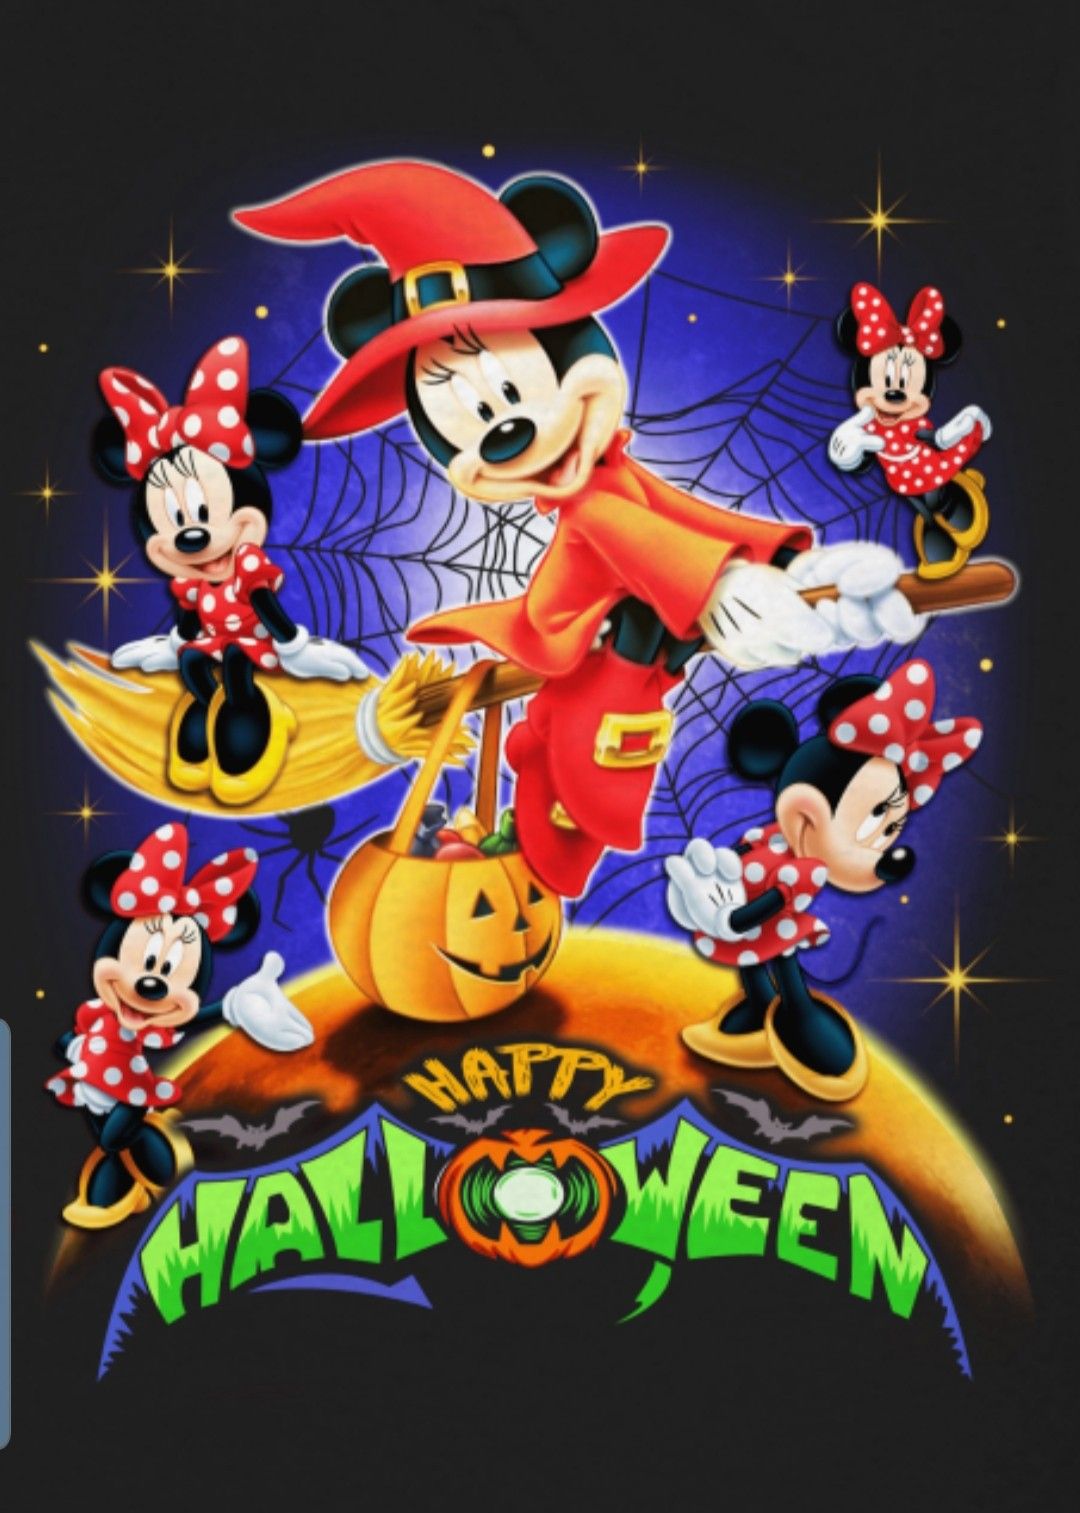 Halloween Mouse. Disney holiday, Mickey mouse picture, Halloween kids